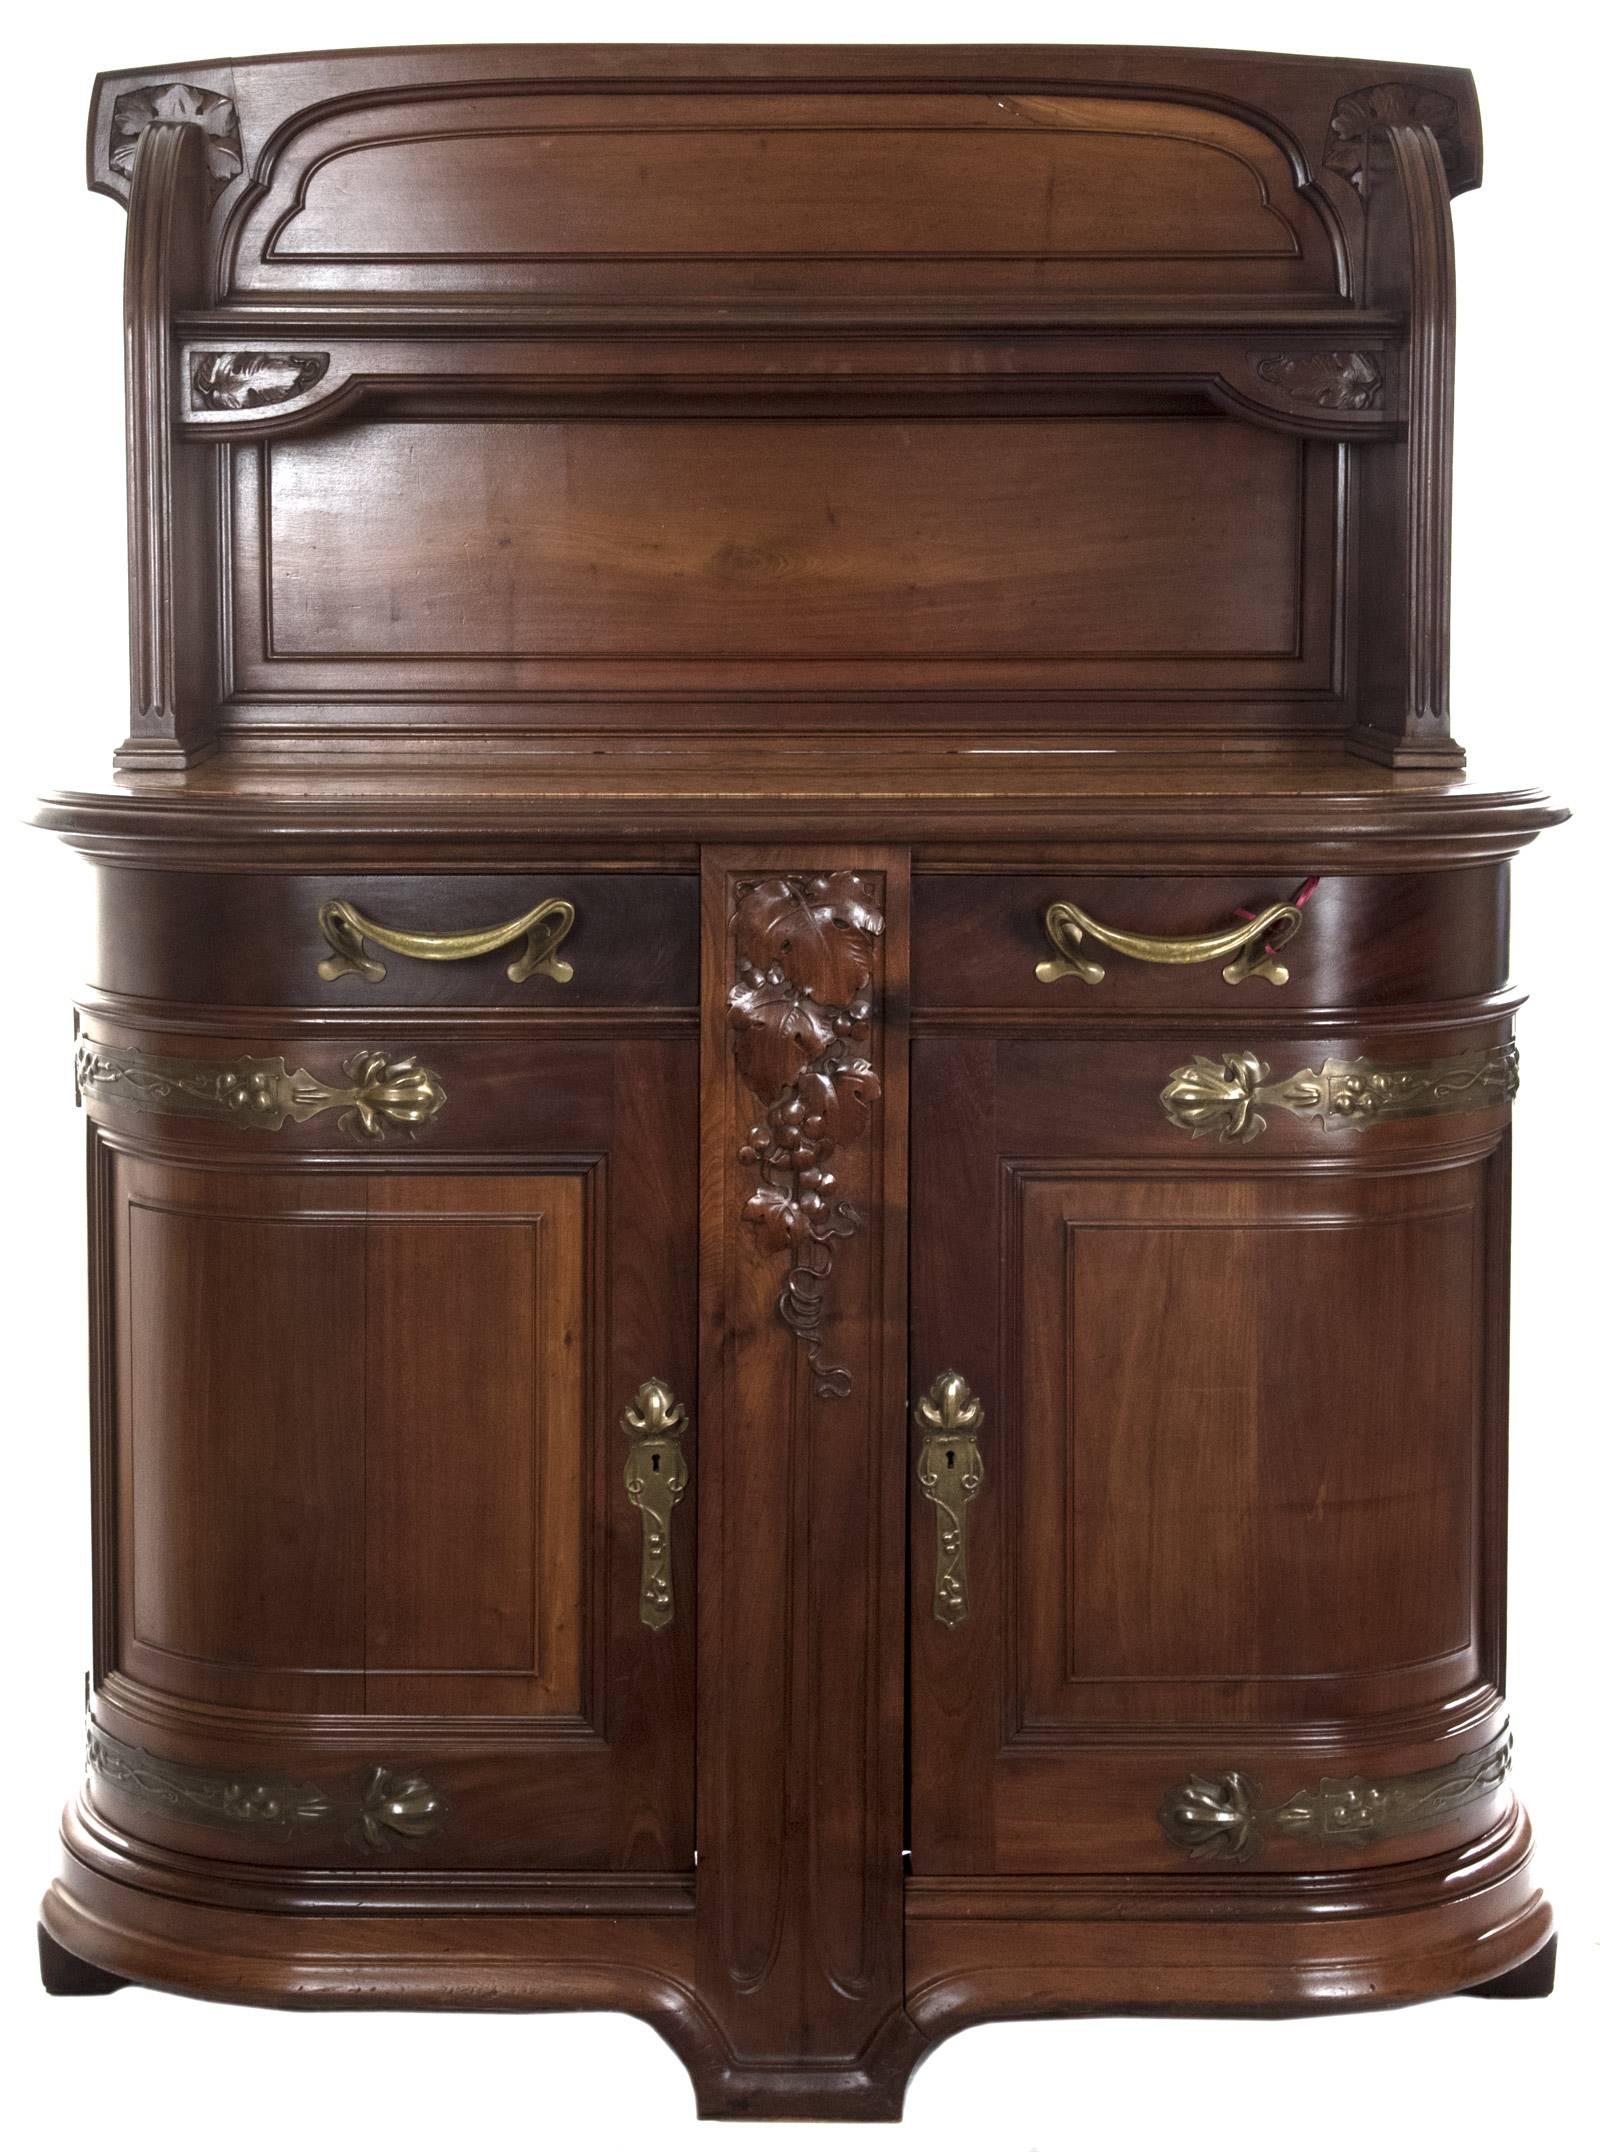 French Art Nouveau Mahogany Sideboard after Louis Majorelle 1